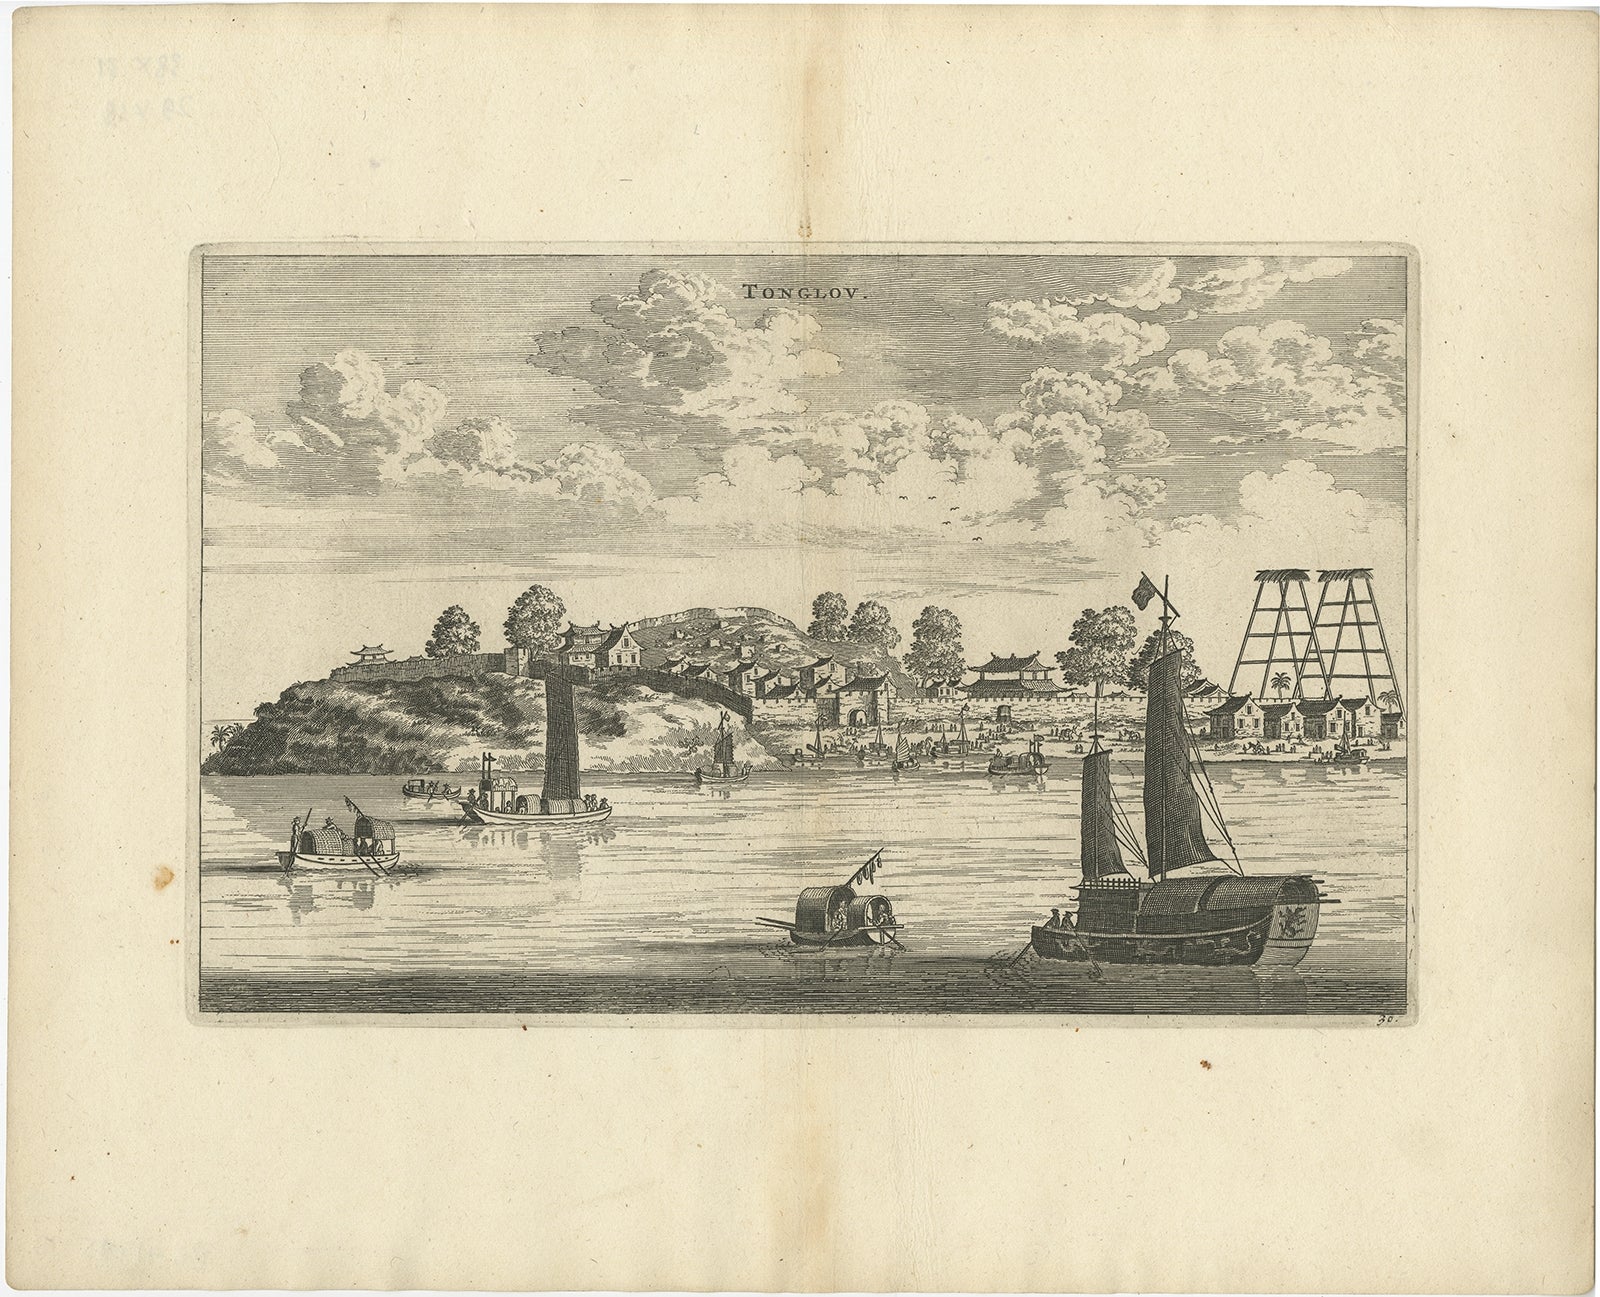 Antique Print of the City of Tonglou in China, 1668